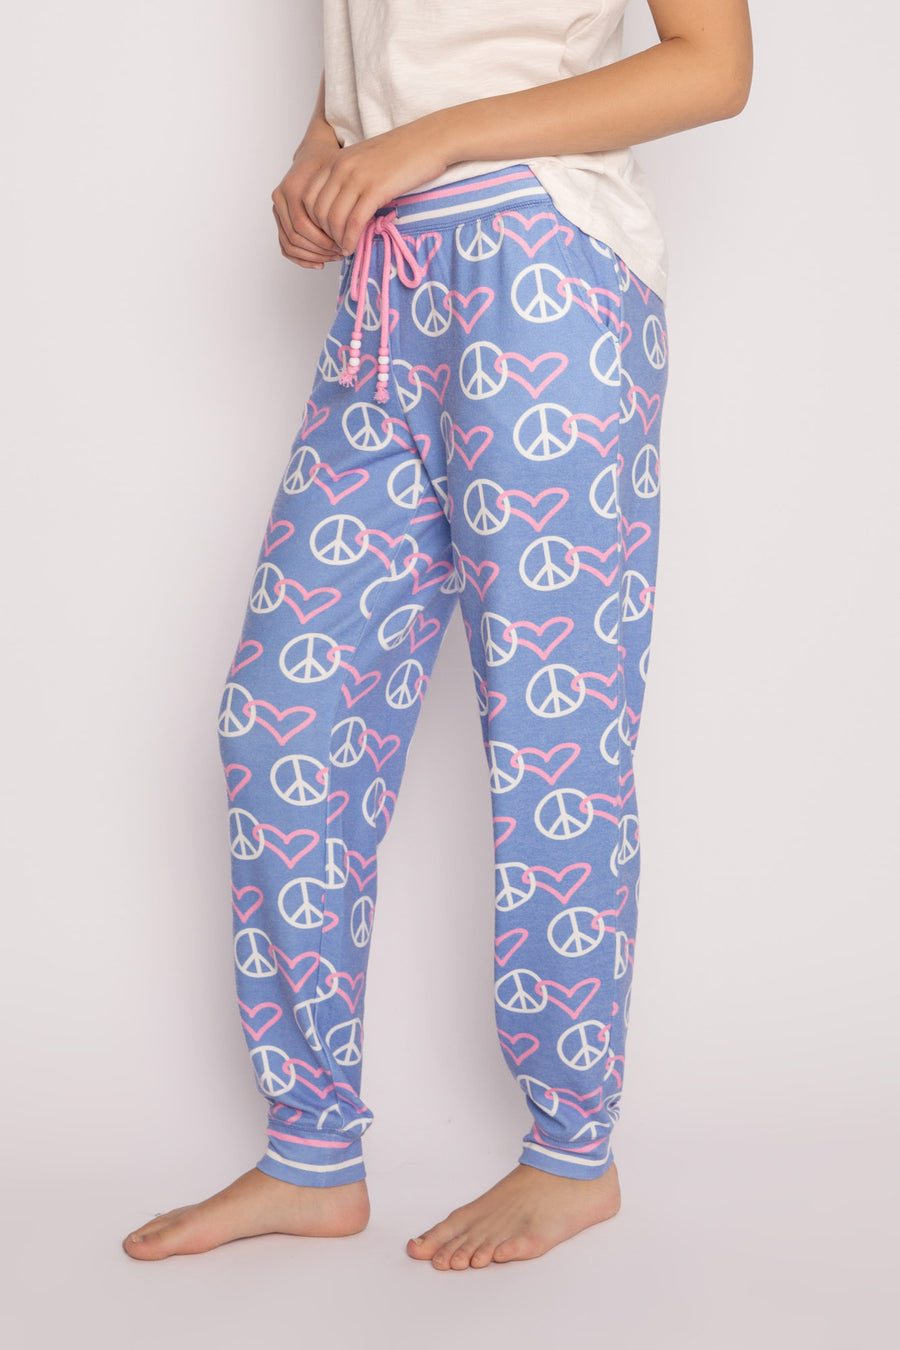 P.J. Salvage Peace and Love Jammie Pant - The Blue House